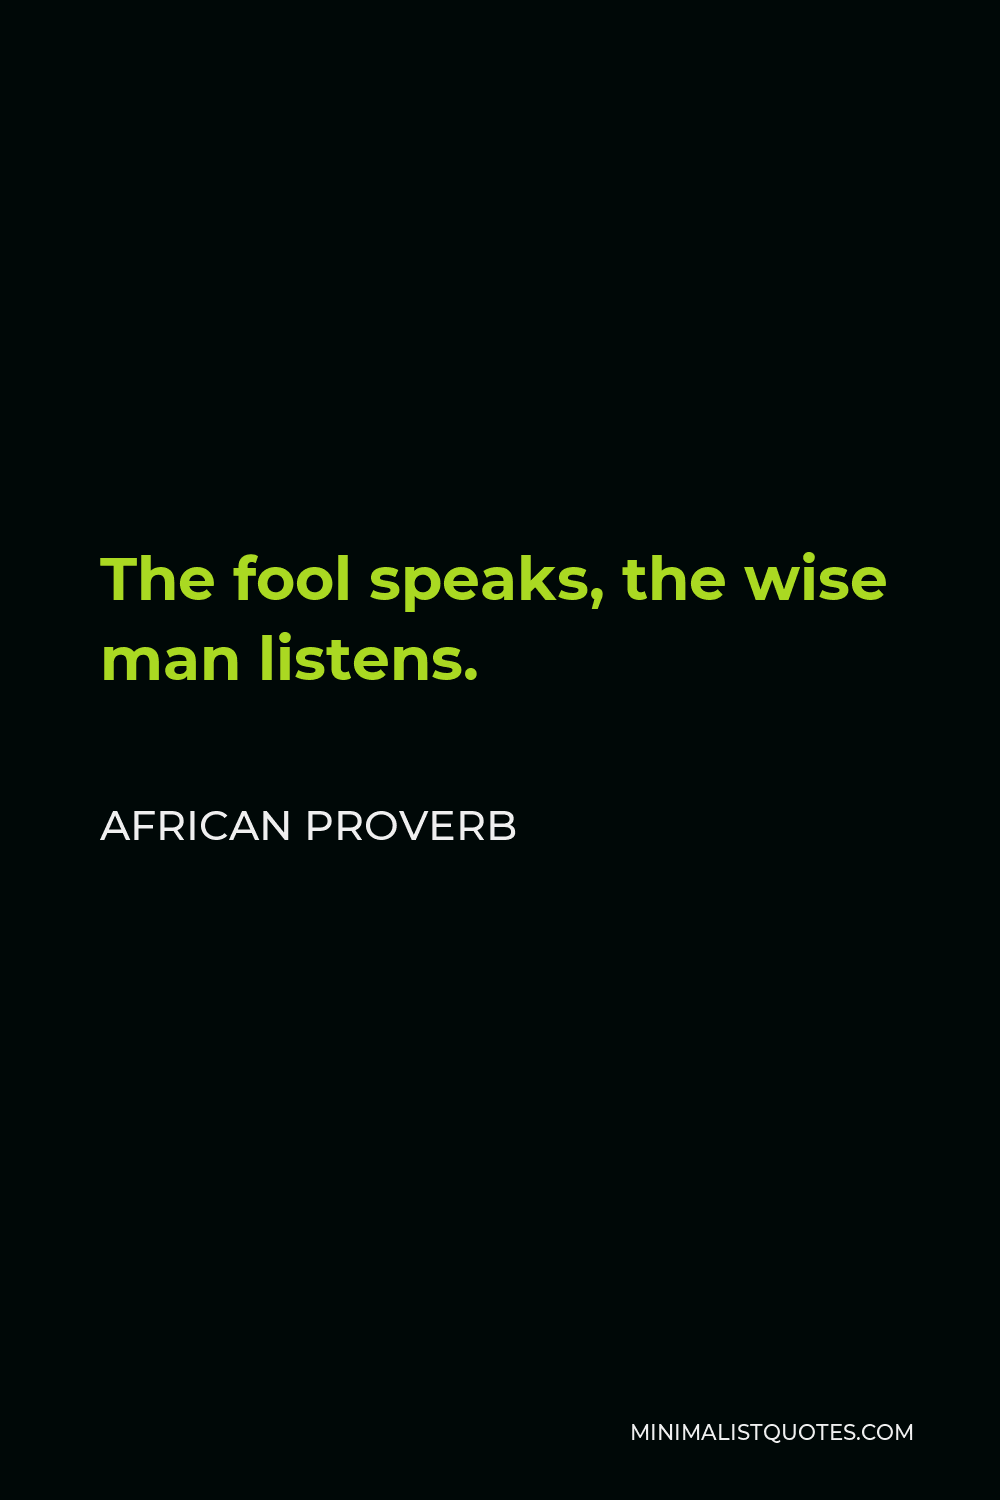 African Proverb Quote - The fool speaks, the wise man listens.